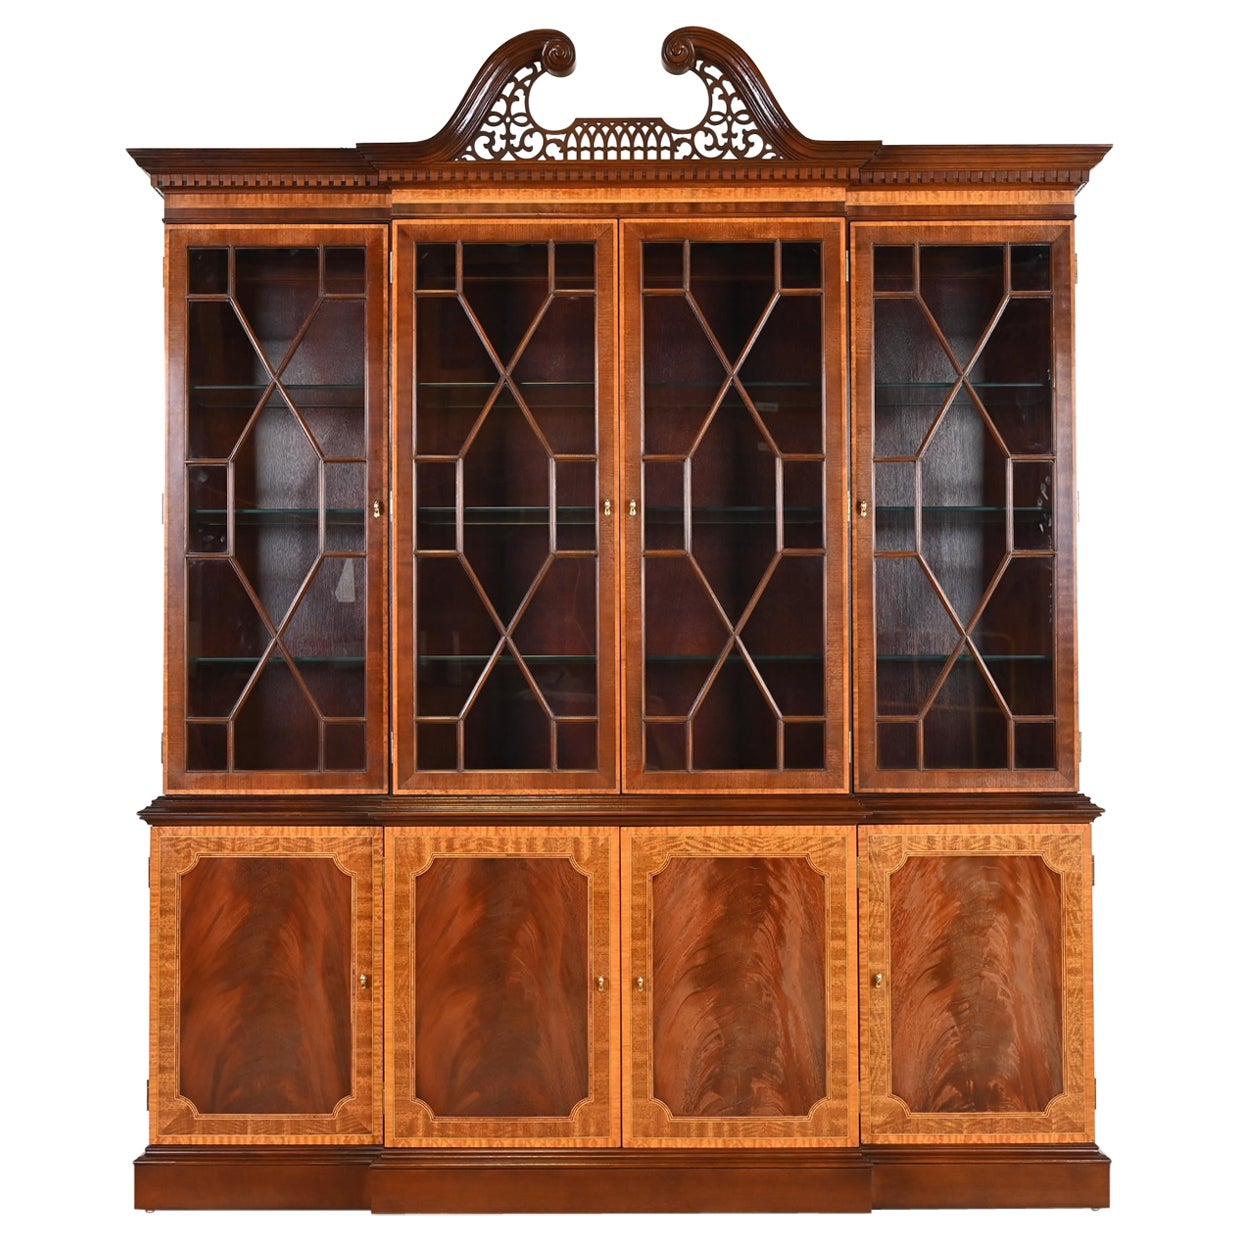 Georgian Carved Mahogany Lighted Breakfront Bookcase Cabinet by Craftique